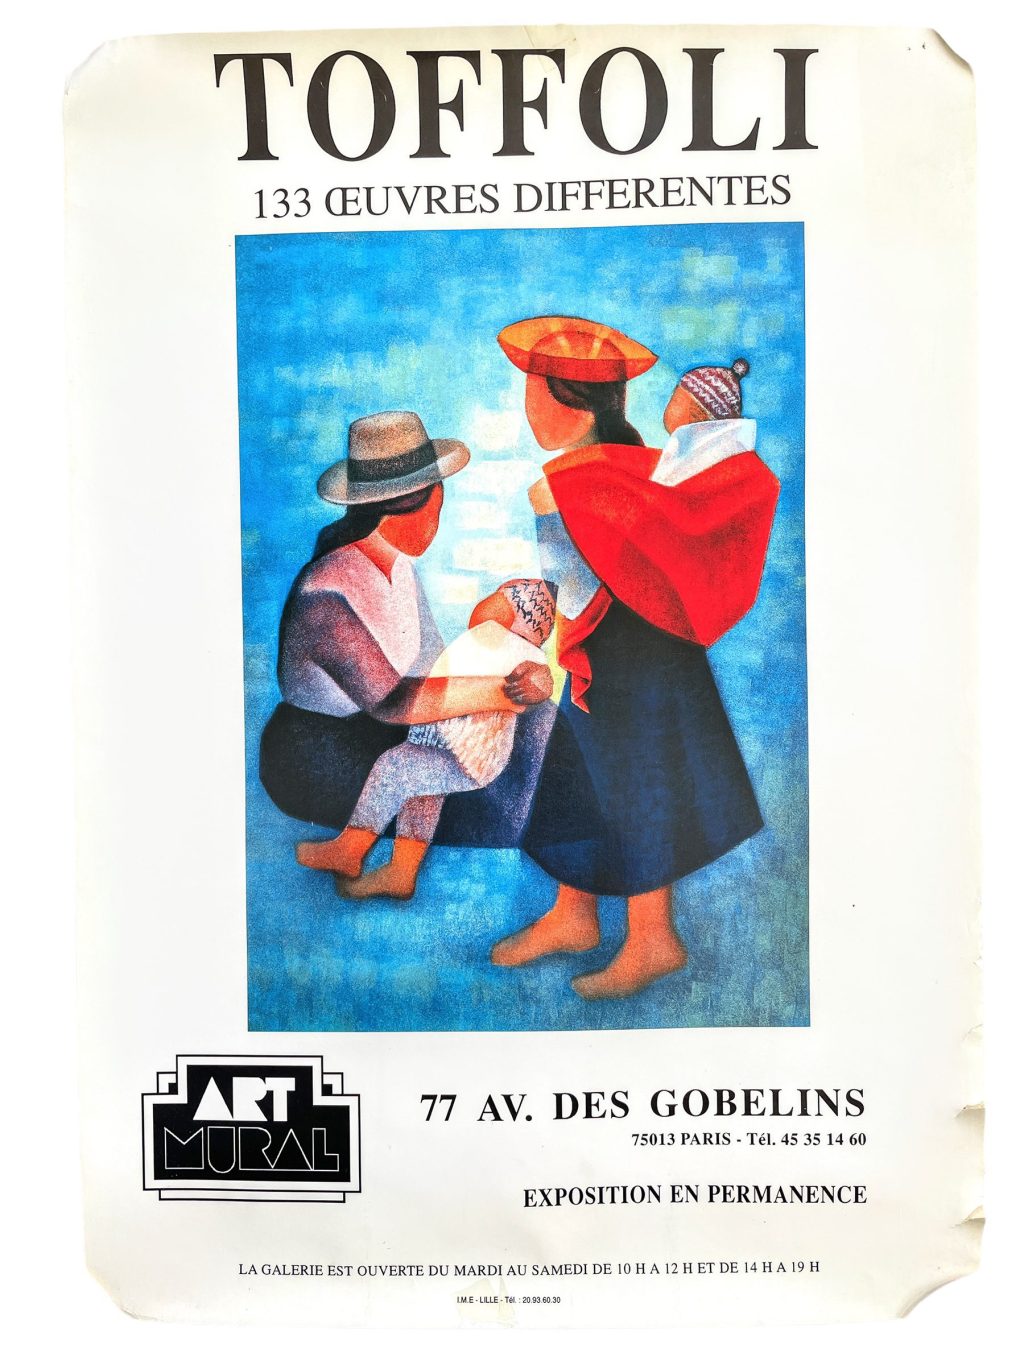 Vintage French Toffoli Galerie Art Mural Paris Gallery Original Exhibition Poster Wall Decor Painting Display c1990’s / EVE